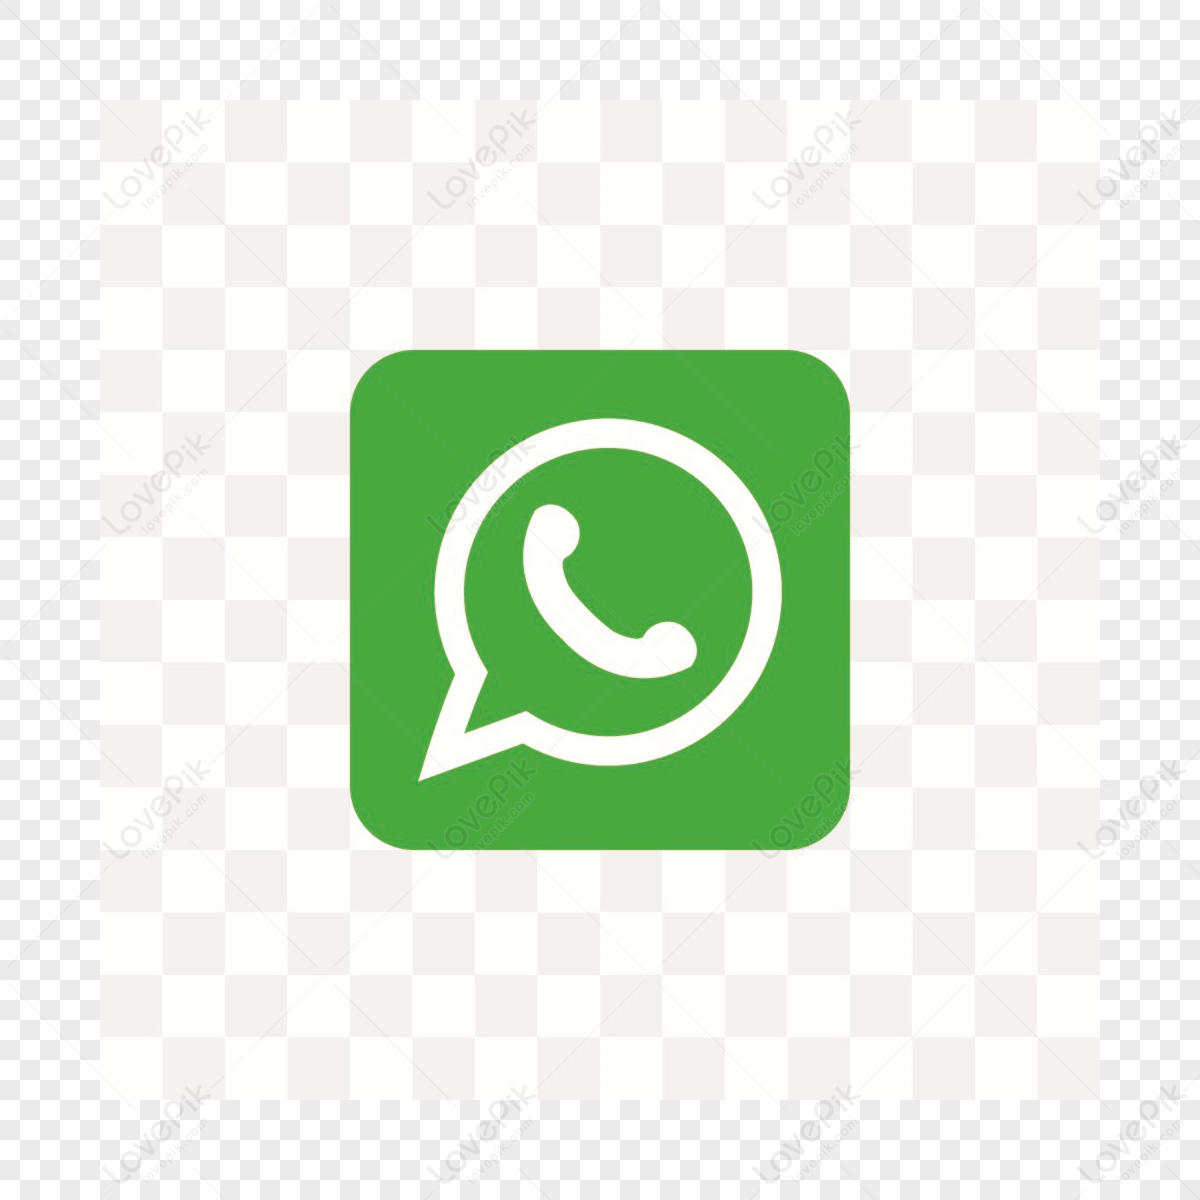 Whatsapp Clipart Transparent PNG Hd, Whatsapp Icon Whatsapp Logo, Whatsapp  Icons, Logo Icons, Whatsapp Clipart PNG Image For Free Download